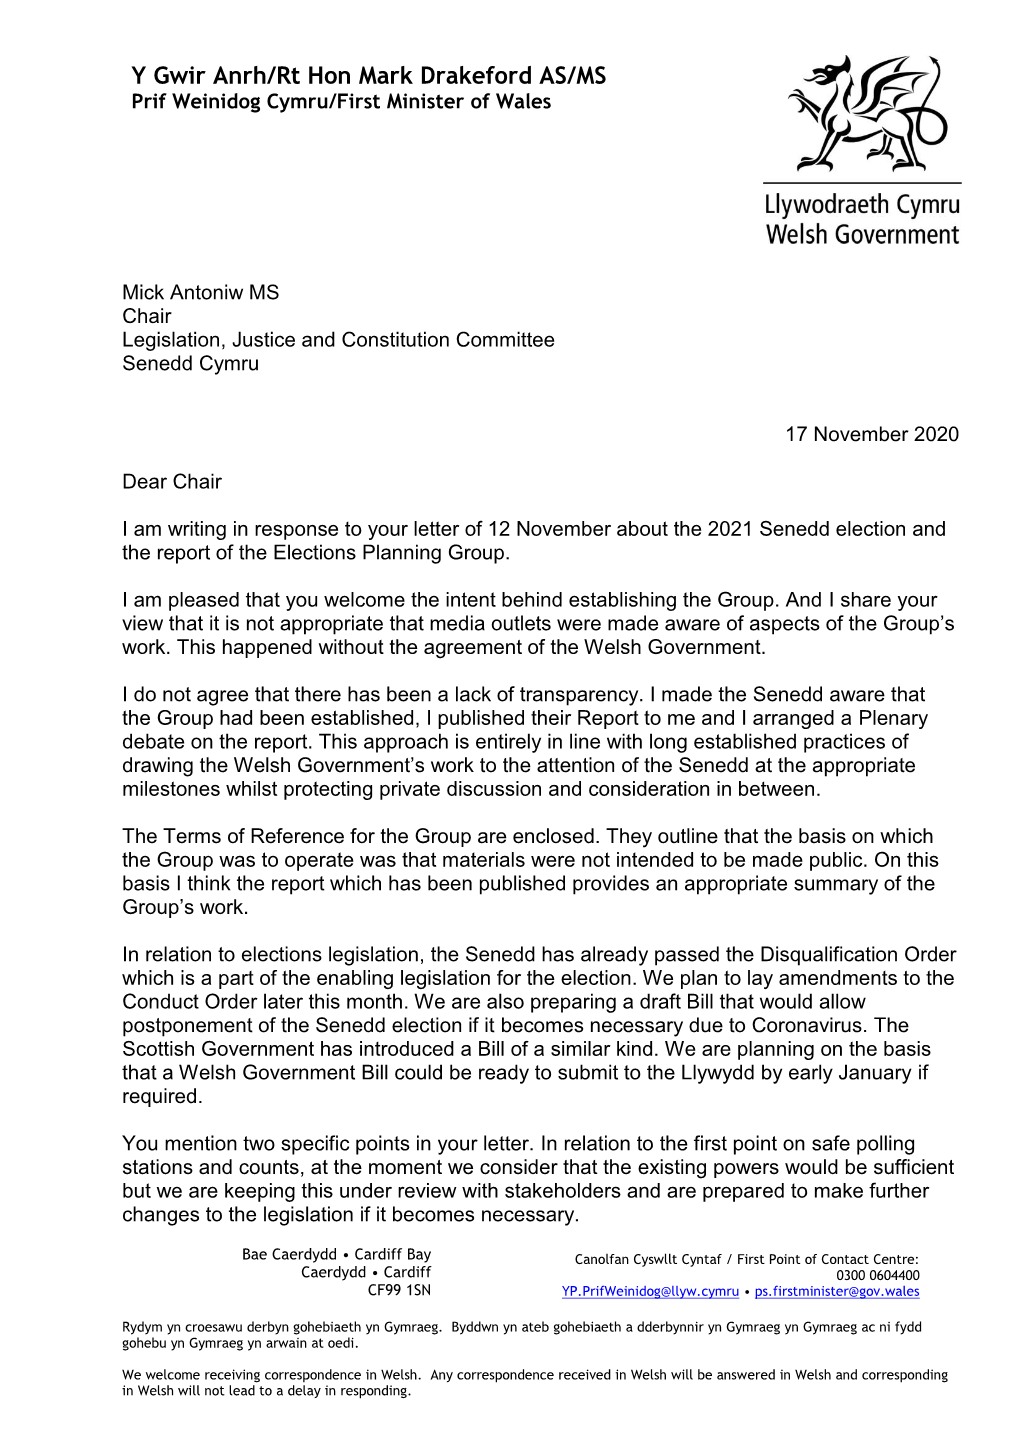 Letter from the First Minister: 2021 Senedd Election